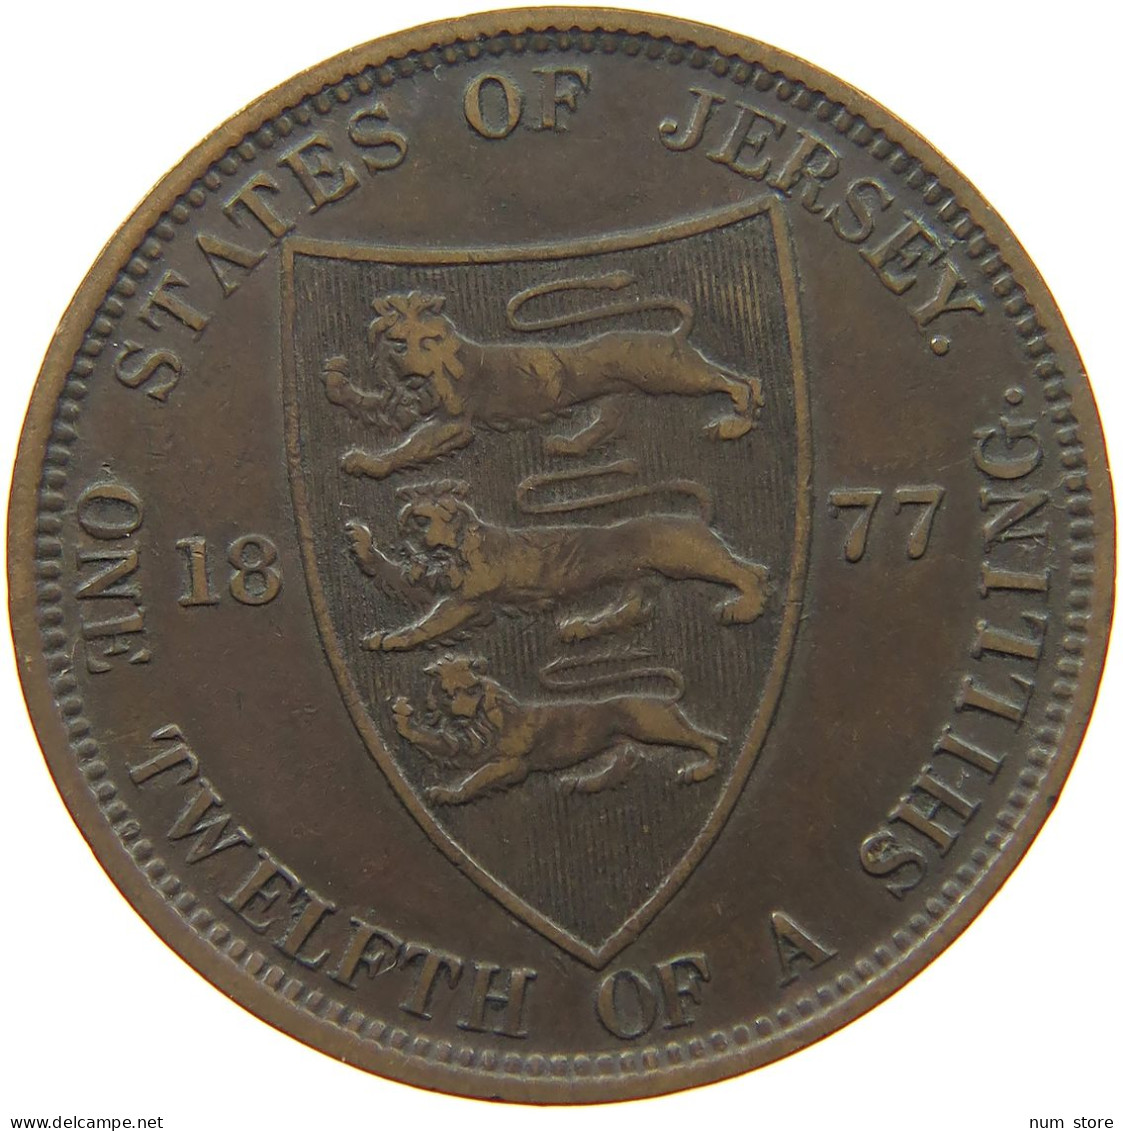 JERSEY 1/12 SHILLING 1877 Victoria 1837-1901 #c009 0201 - Jersey